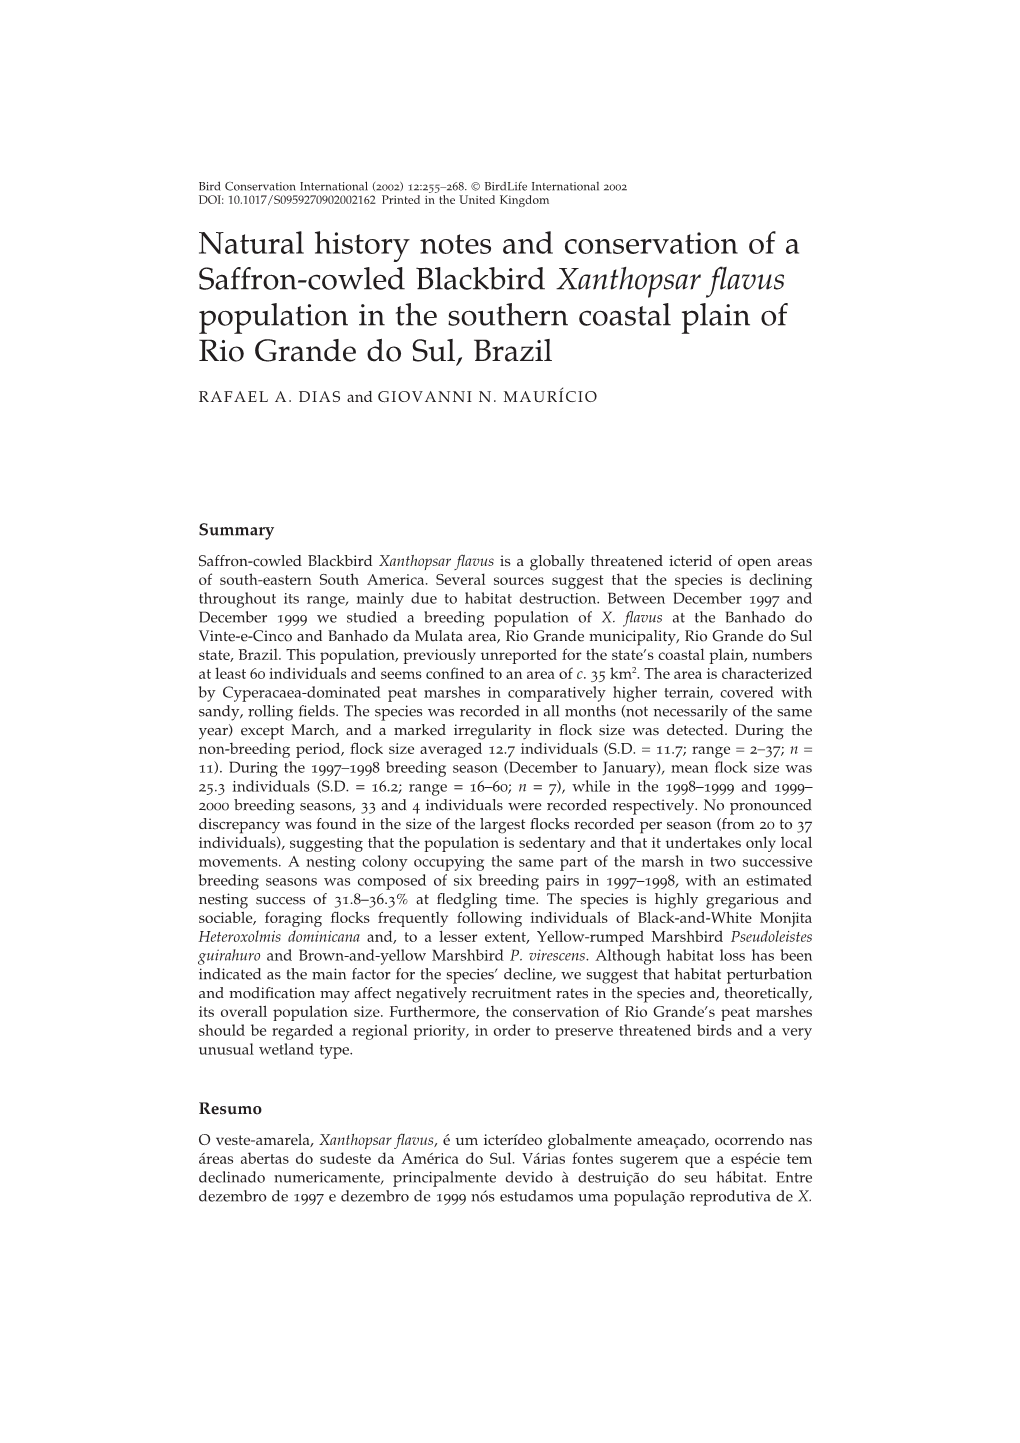 Natural History Notes and Conservation of a Saffron-Cowled Blackbird Xanthopsar ﬂavus Population in the Southern Coastal Plain of Rio Grande Do Sul, Brazil